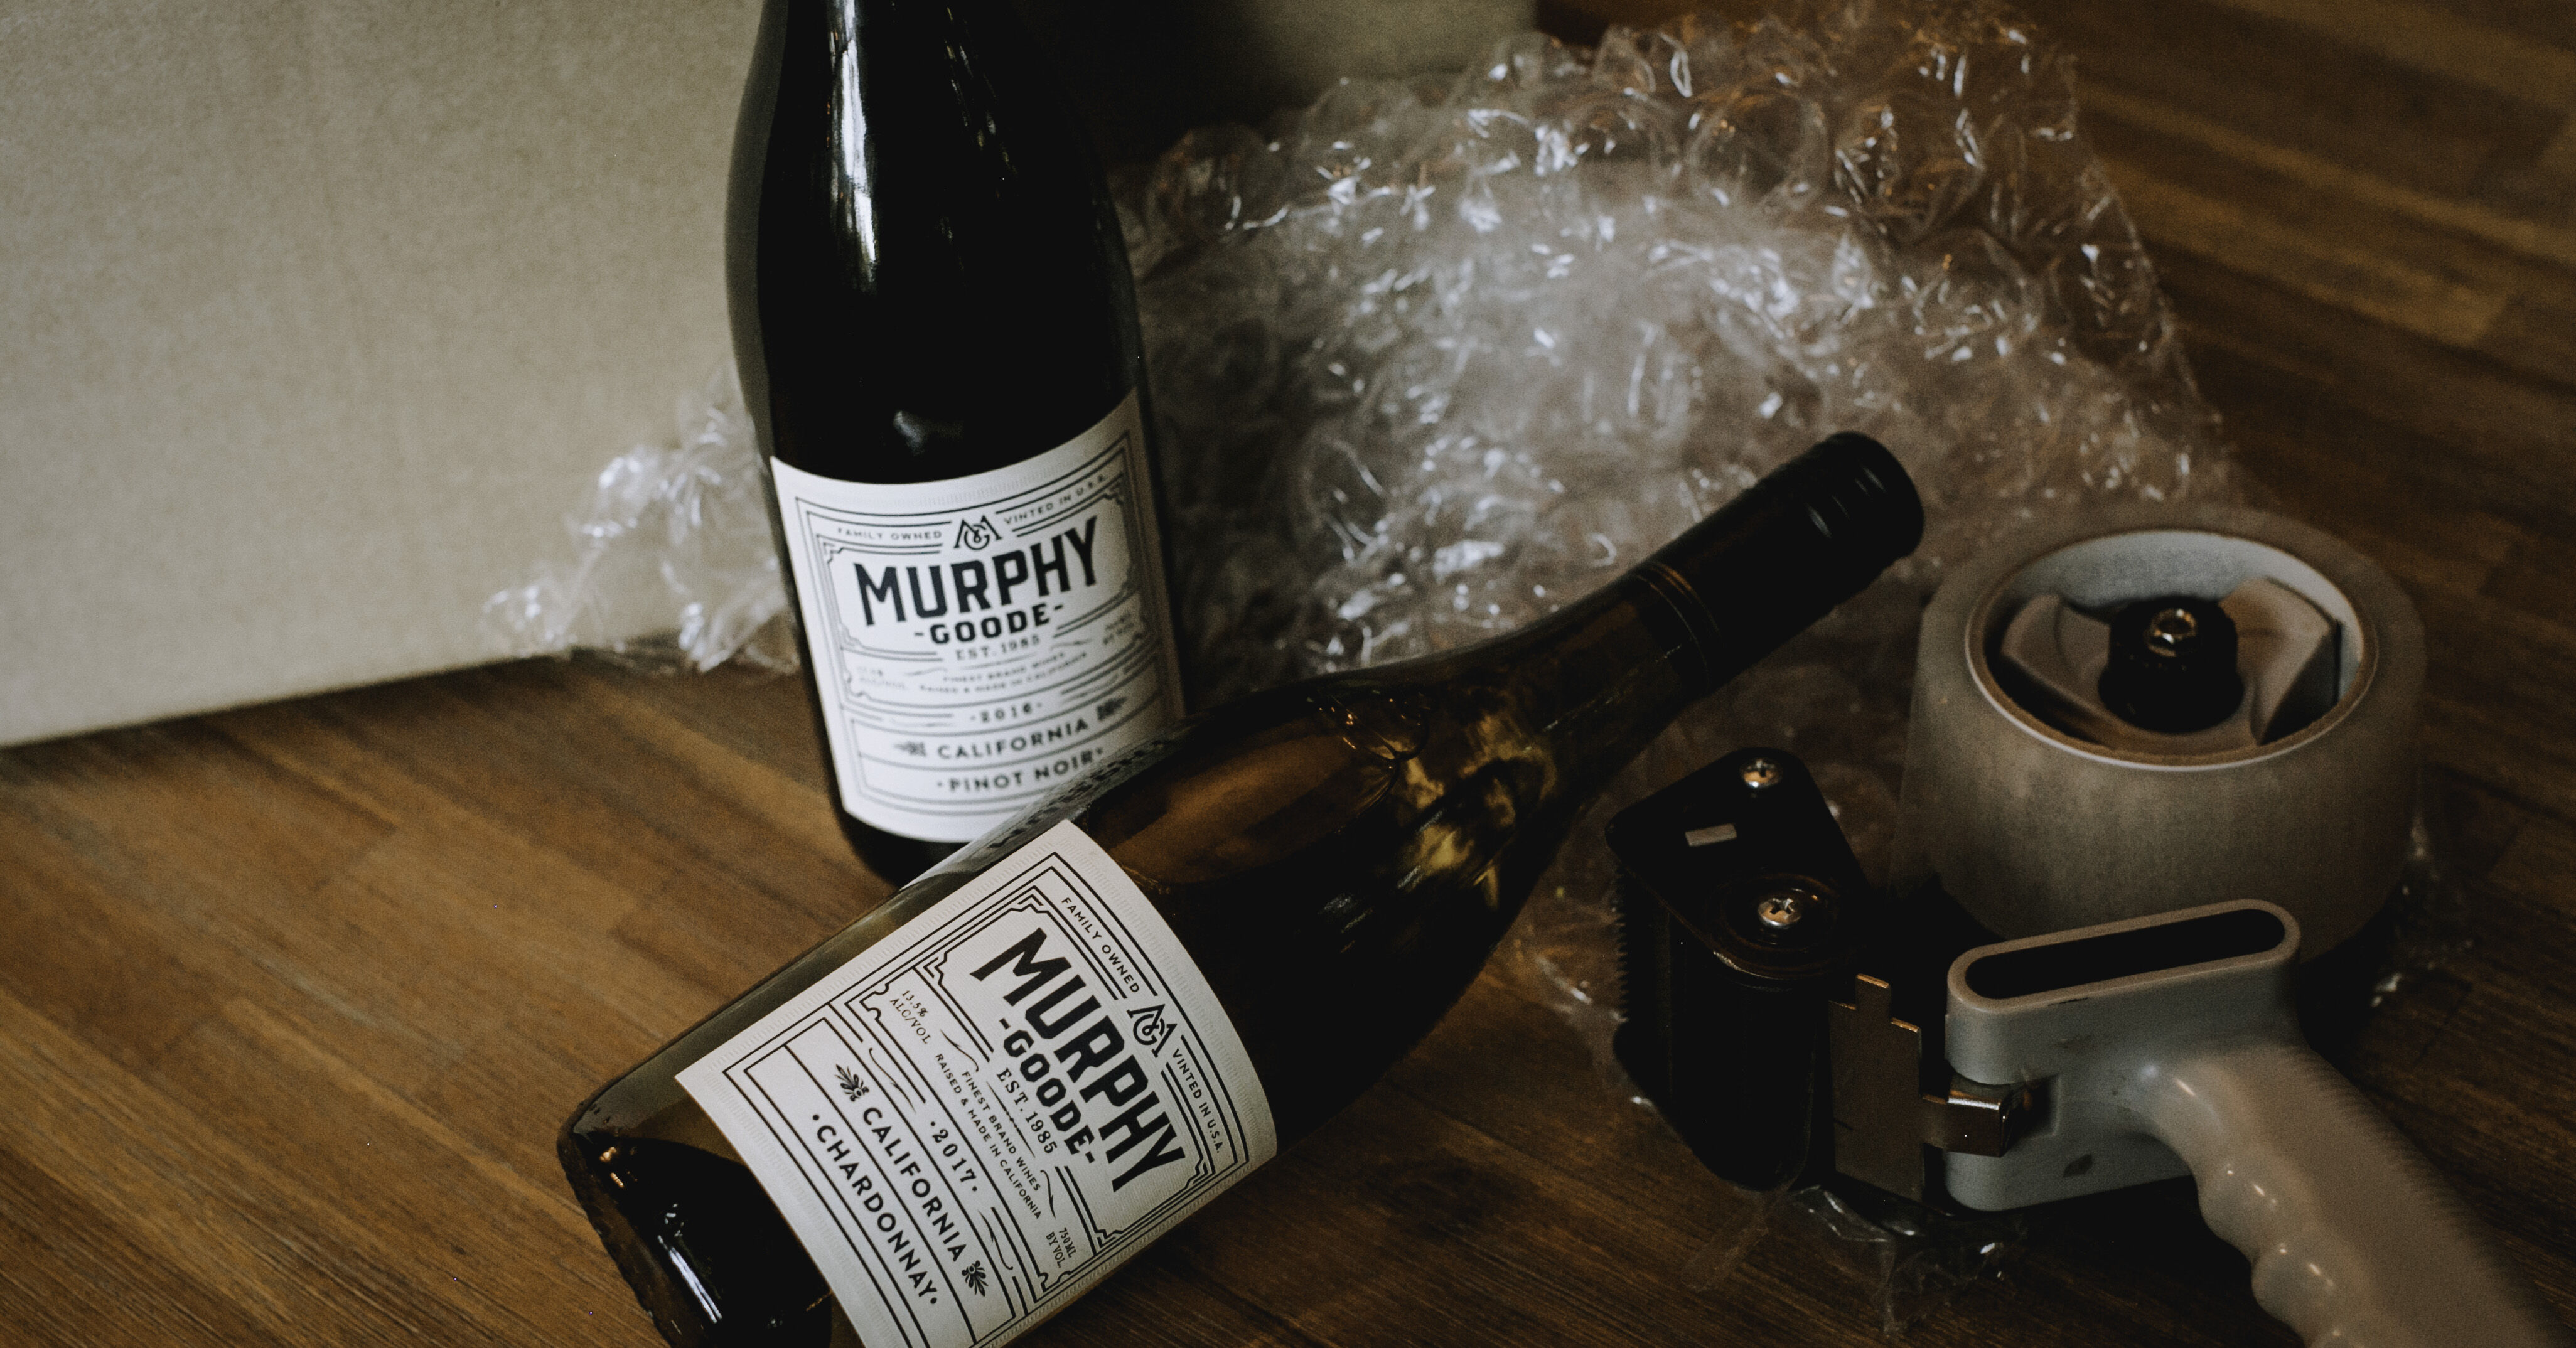 Murphy-Goode wine bottles on a table with bubble wrap and packaging tape